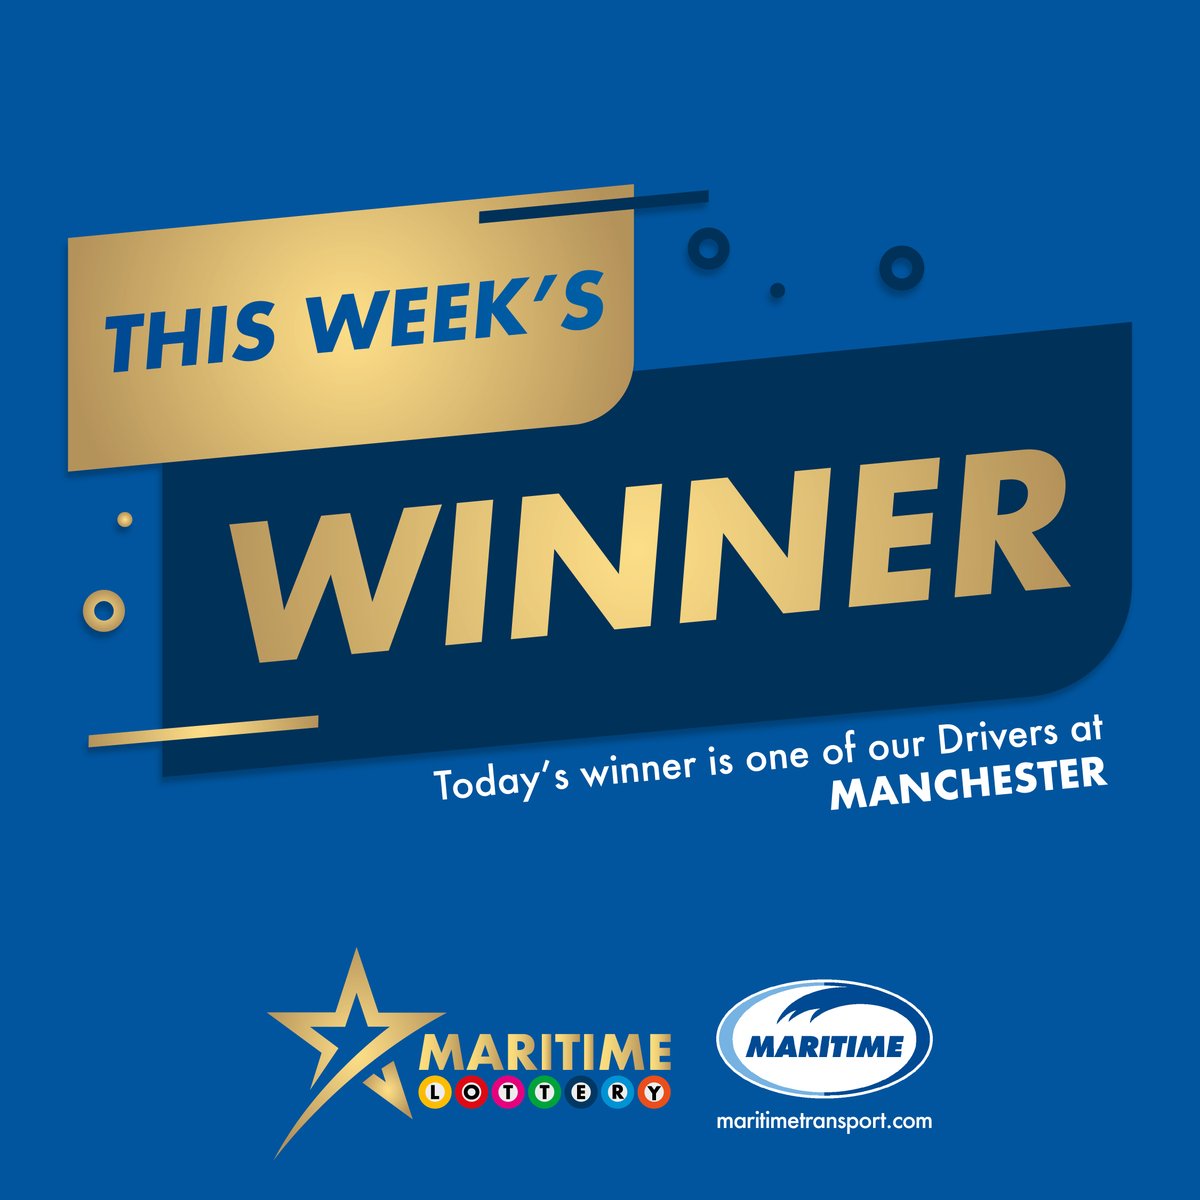 Congratulations to one of our Drivers, based at Manchester, who has just been announced as this week’s winner of our Maritime Lottery, taking home £1,000! Employees head to iWave to find out more. #mtllottery #maritimetransport